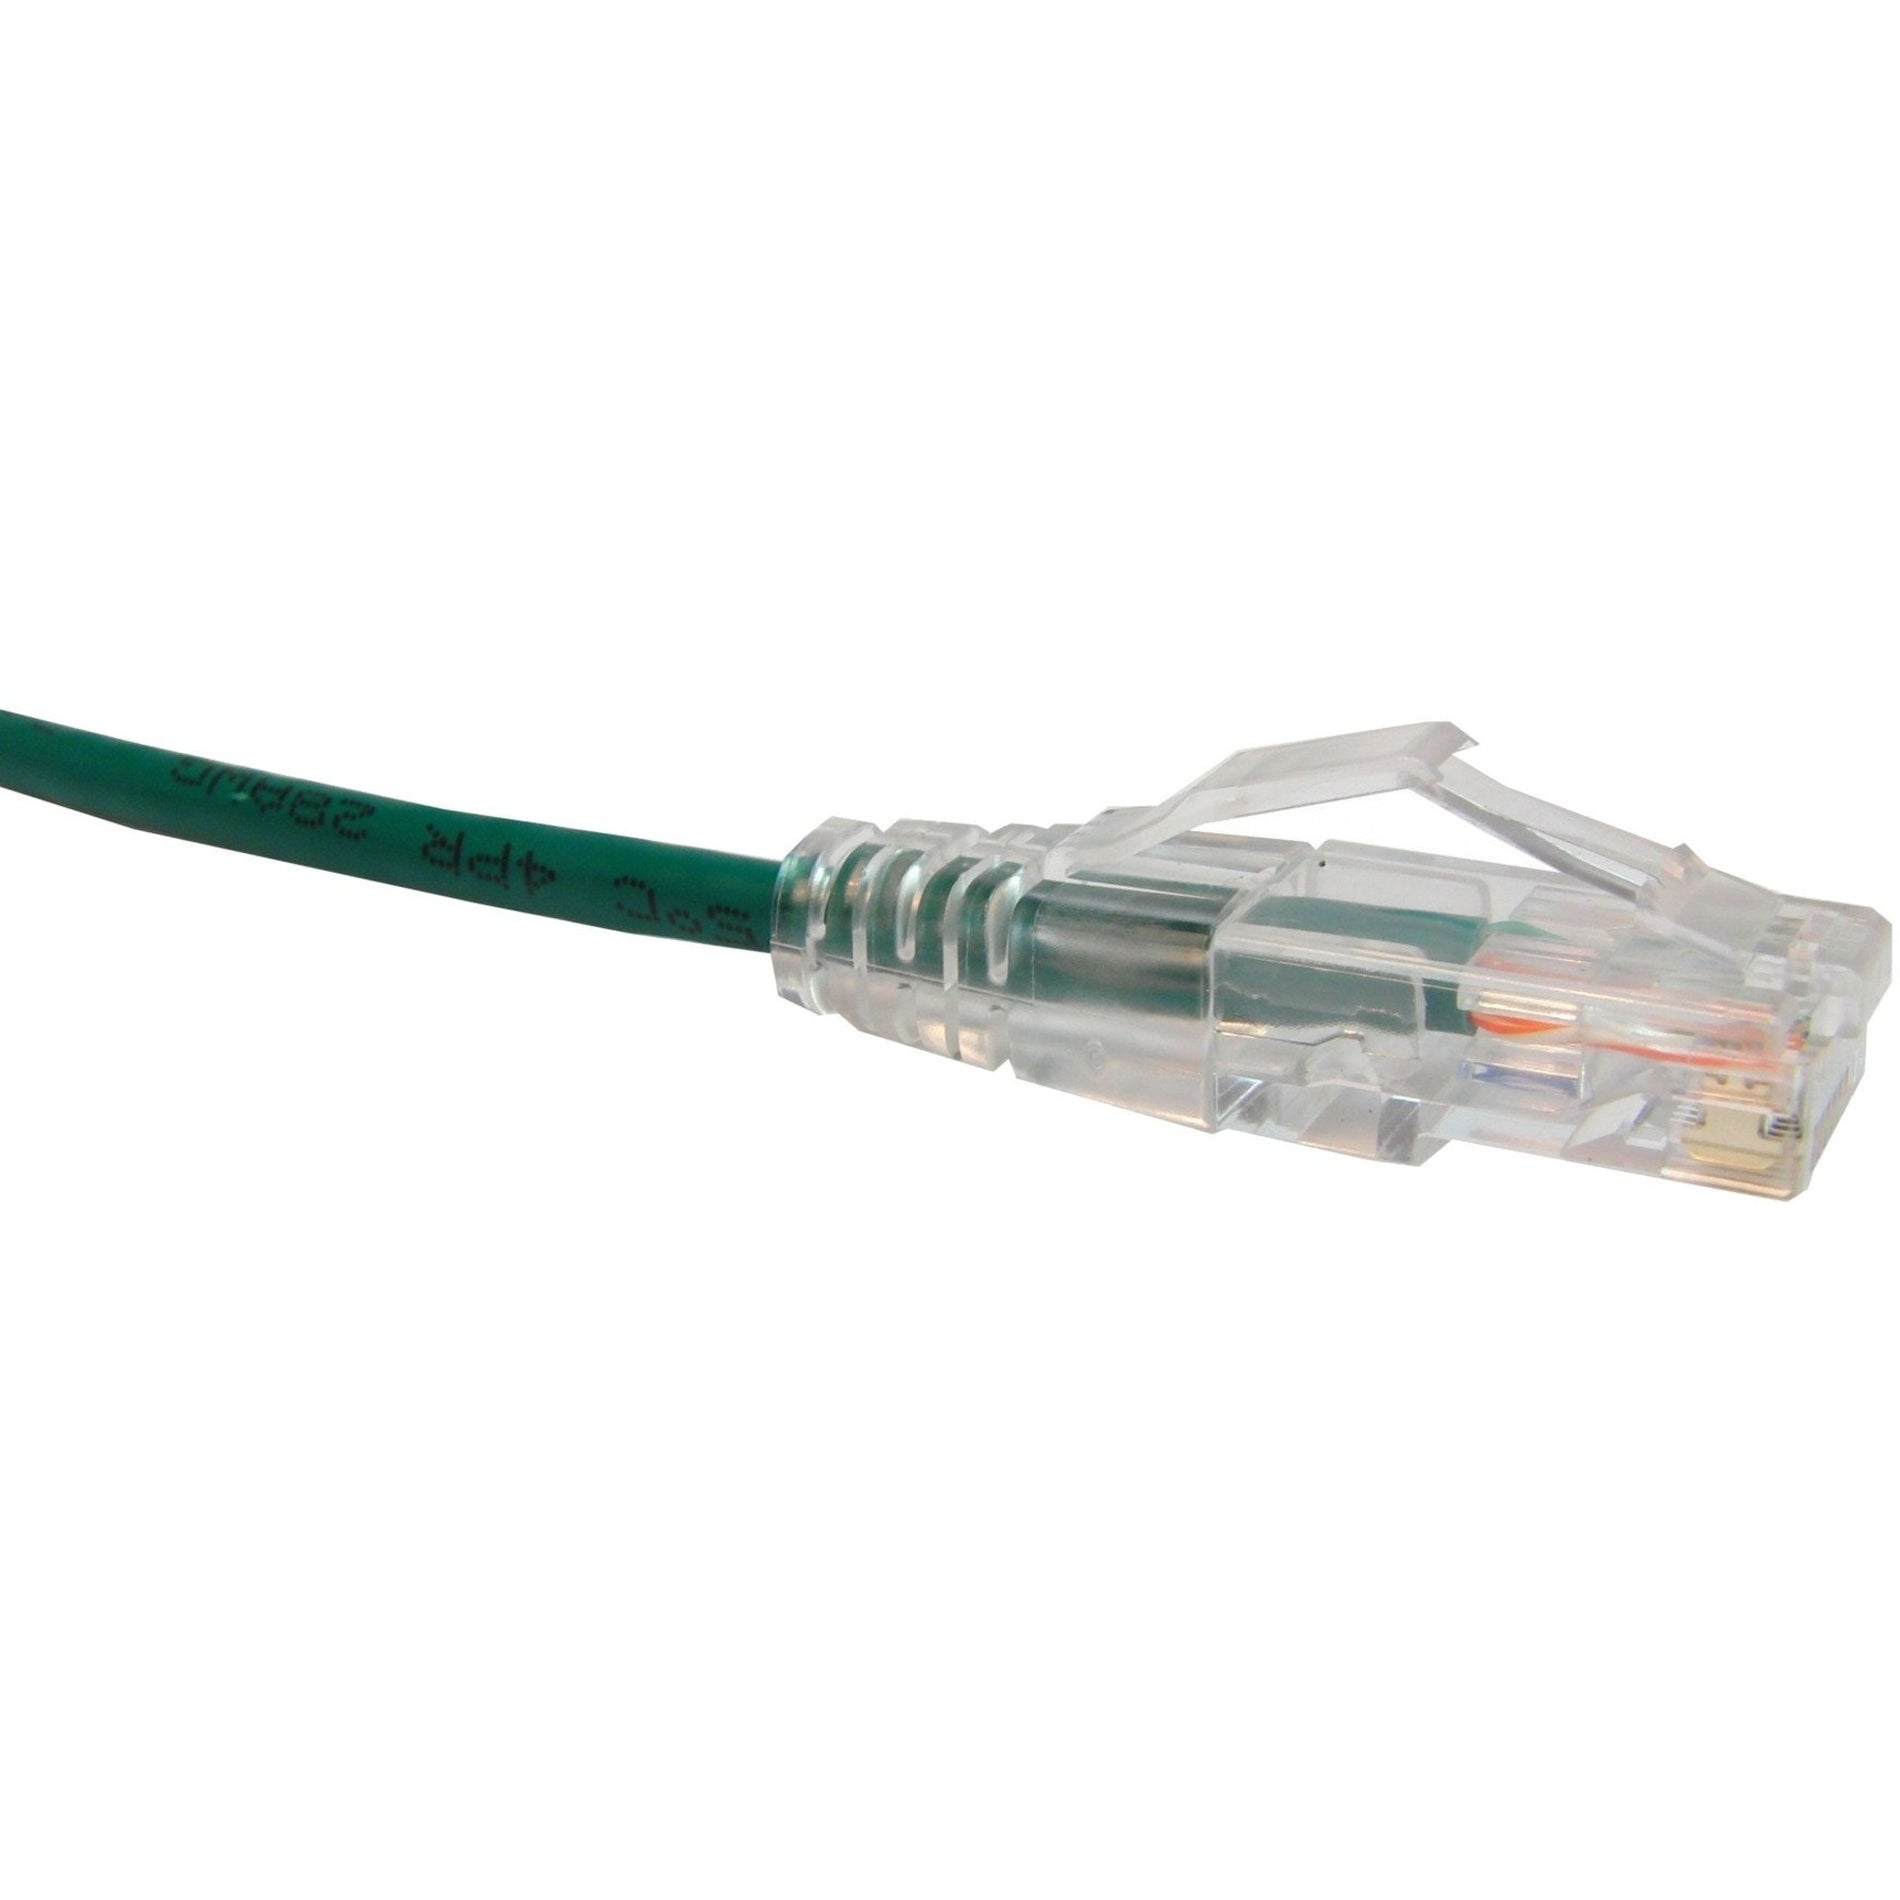 Unirise CS6-03F-GRN Clearfit Slim Cat6 Patch Cable, Green, 3ft